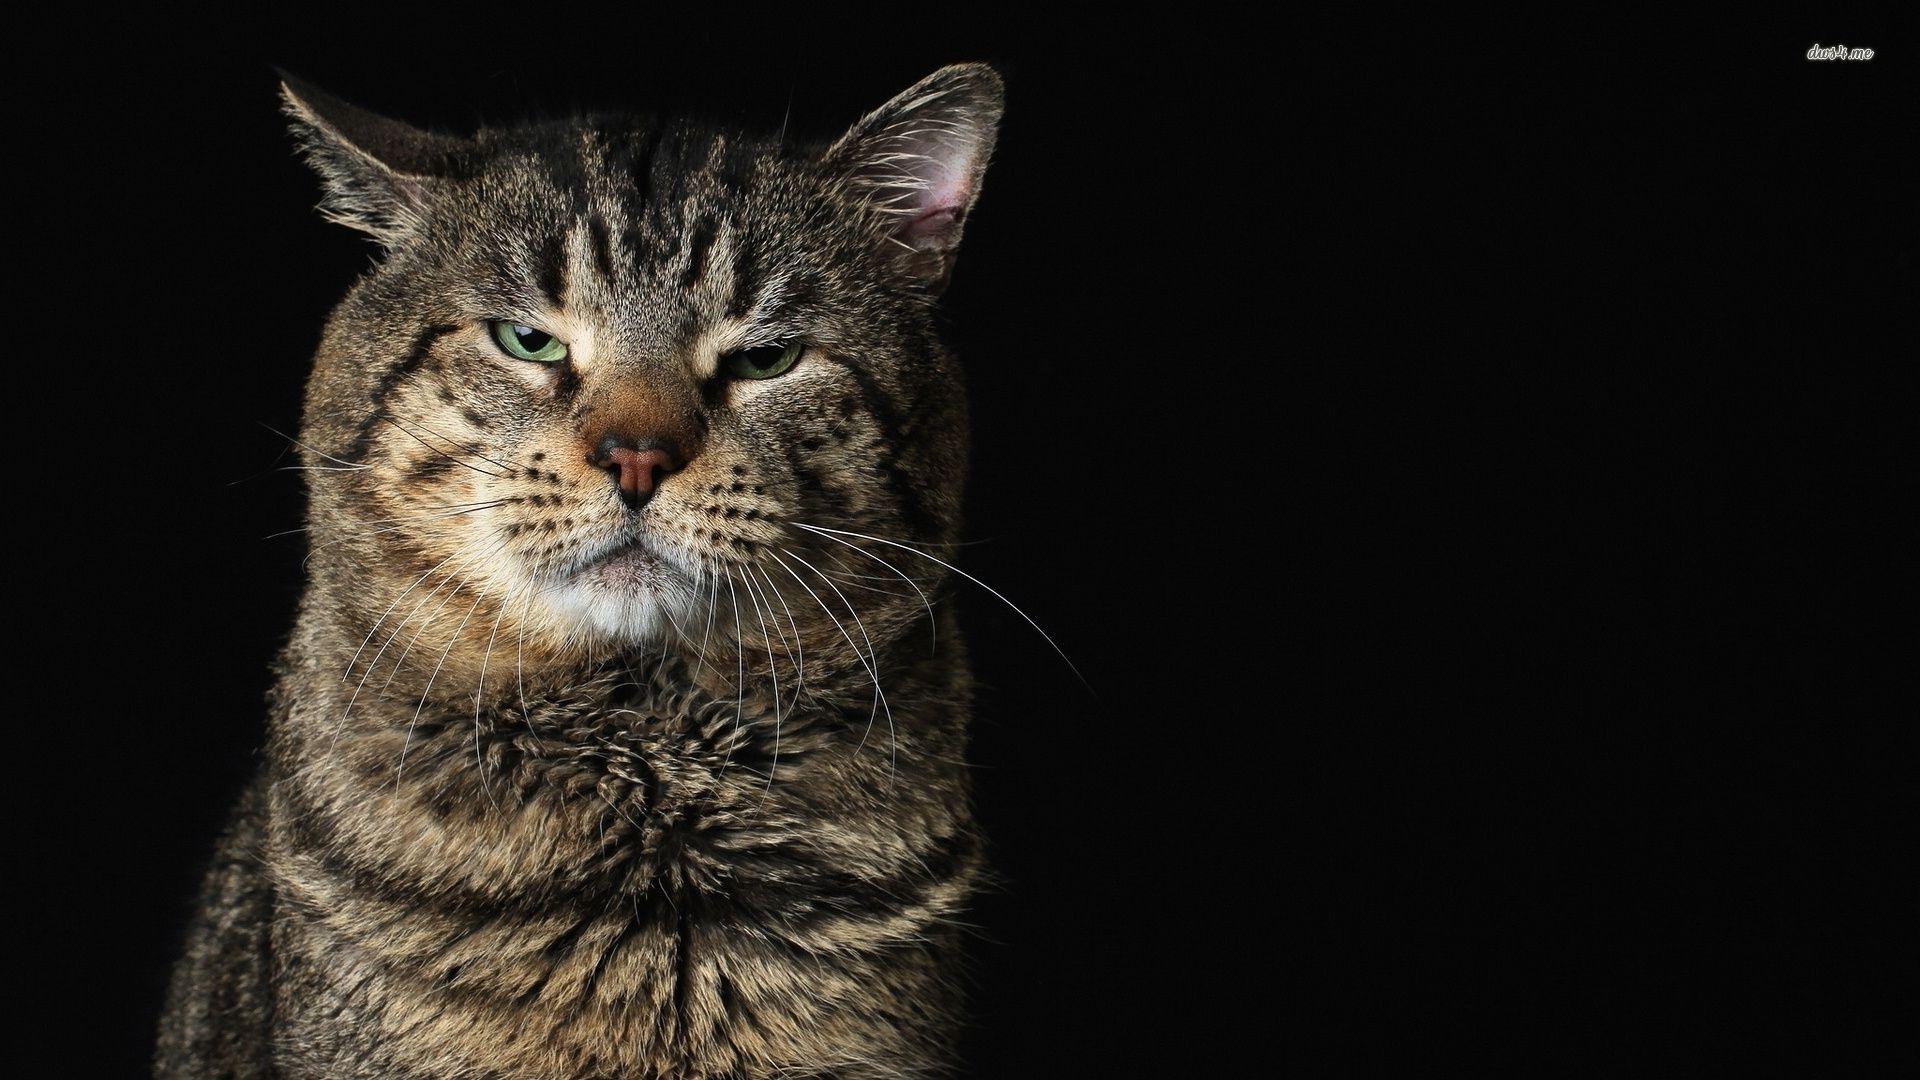 Angry Cat Images : Cat Angry Cats Mad Grumpy Scottish Body Face Fold ...